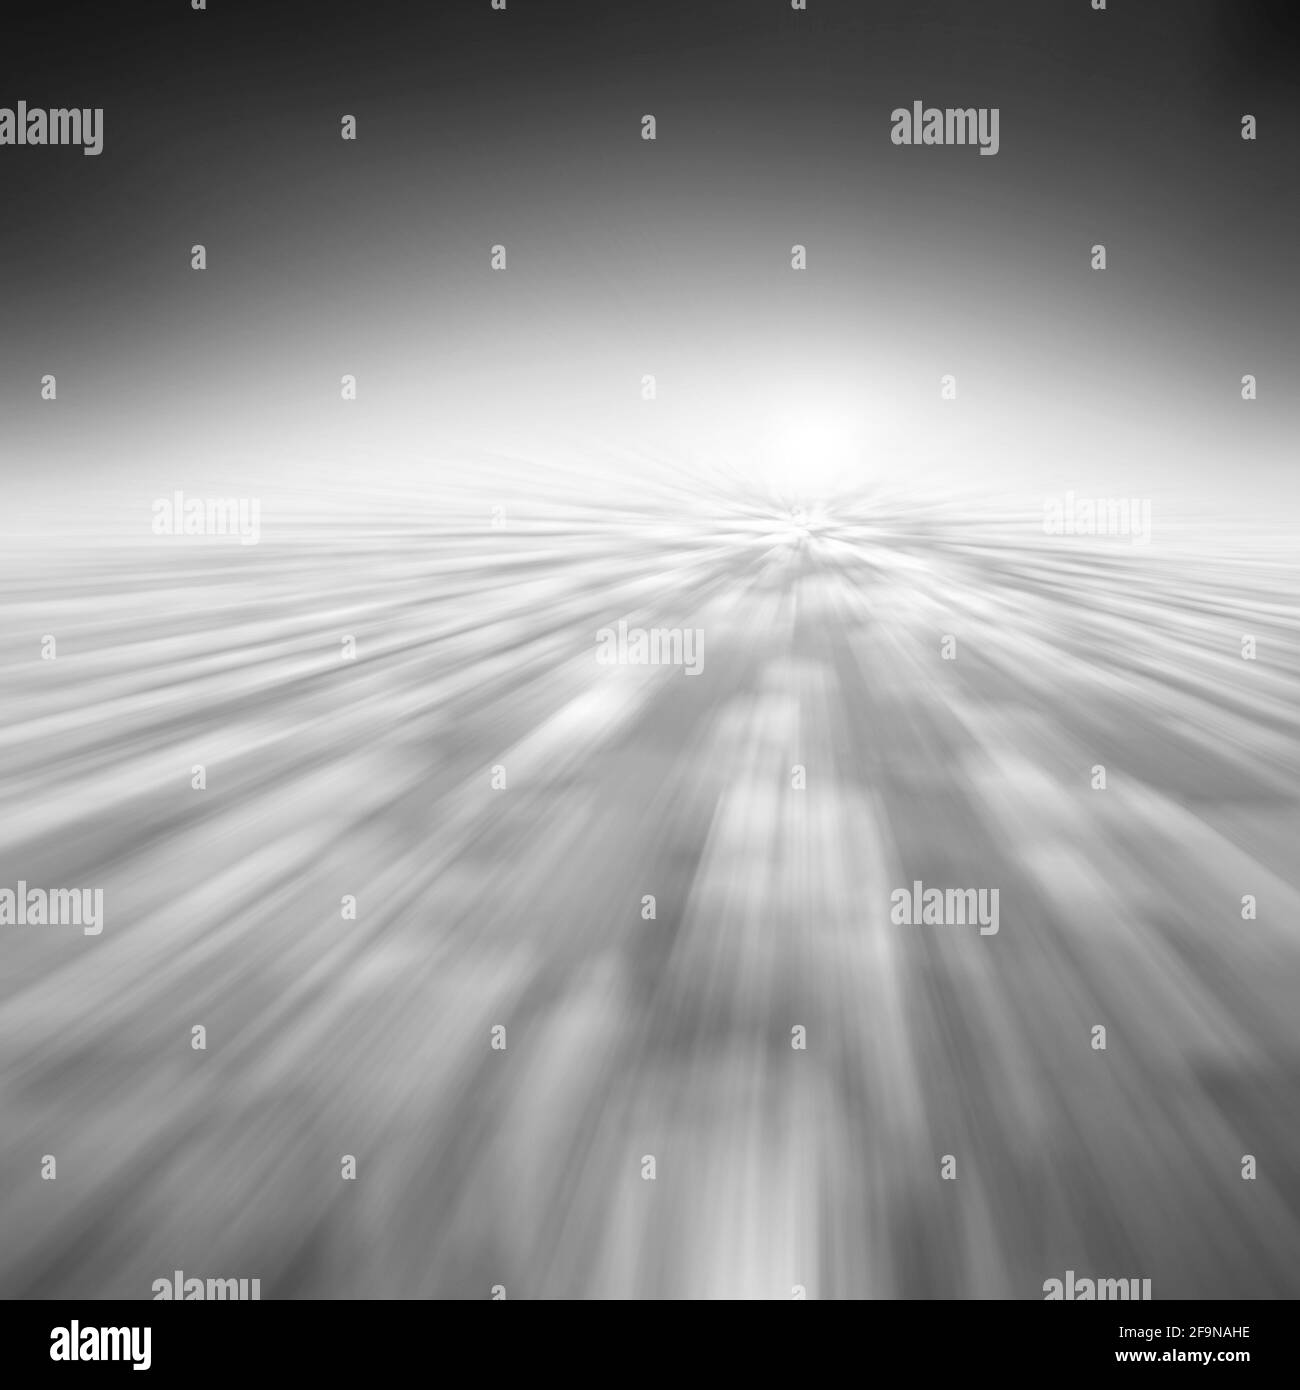 HI-speed moving motion blur abstract background - monochrome Stock Photo